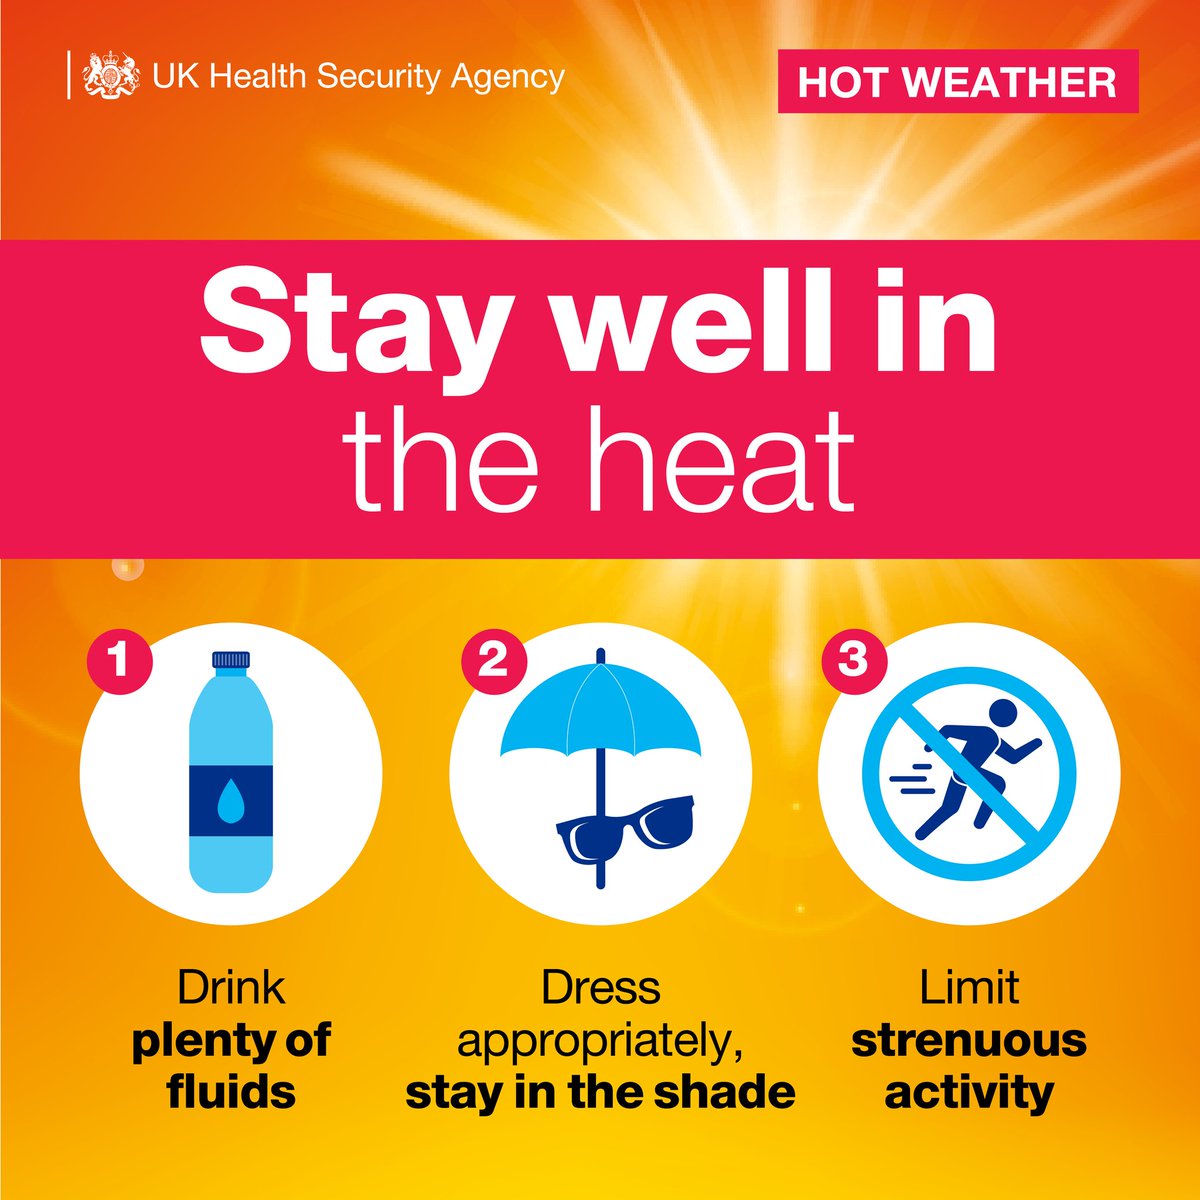 Stay well in the heat ☀ Here are some tips for keeping yourself cool. #BeattheHeat Stay in the shade during the hottest part of the day (11am-3pm) Apply sunscreen frequently Drink plenty of fluids and avoid excess alcohol Limit strenuous activity.